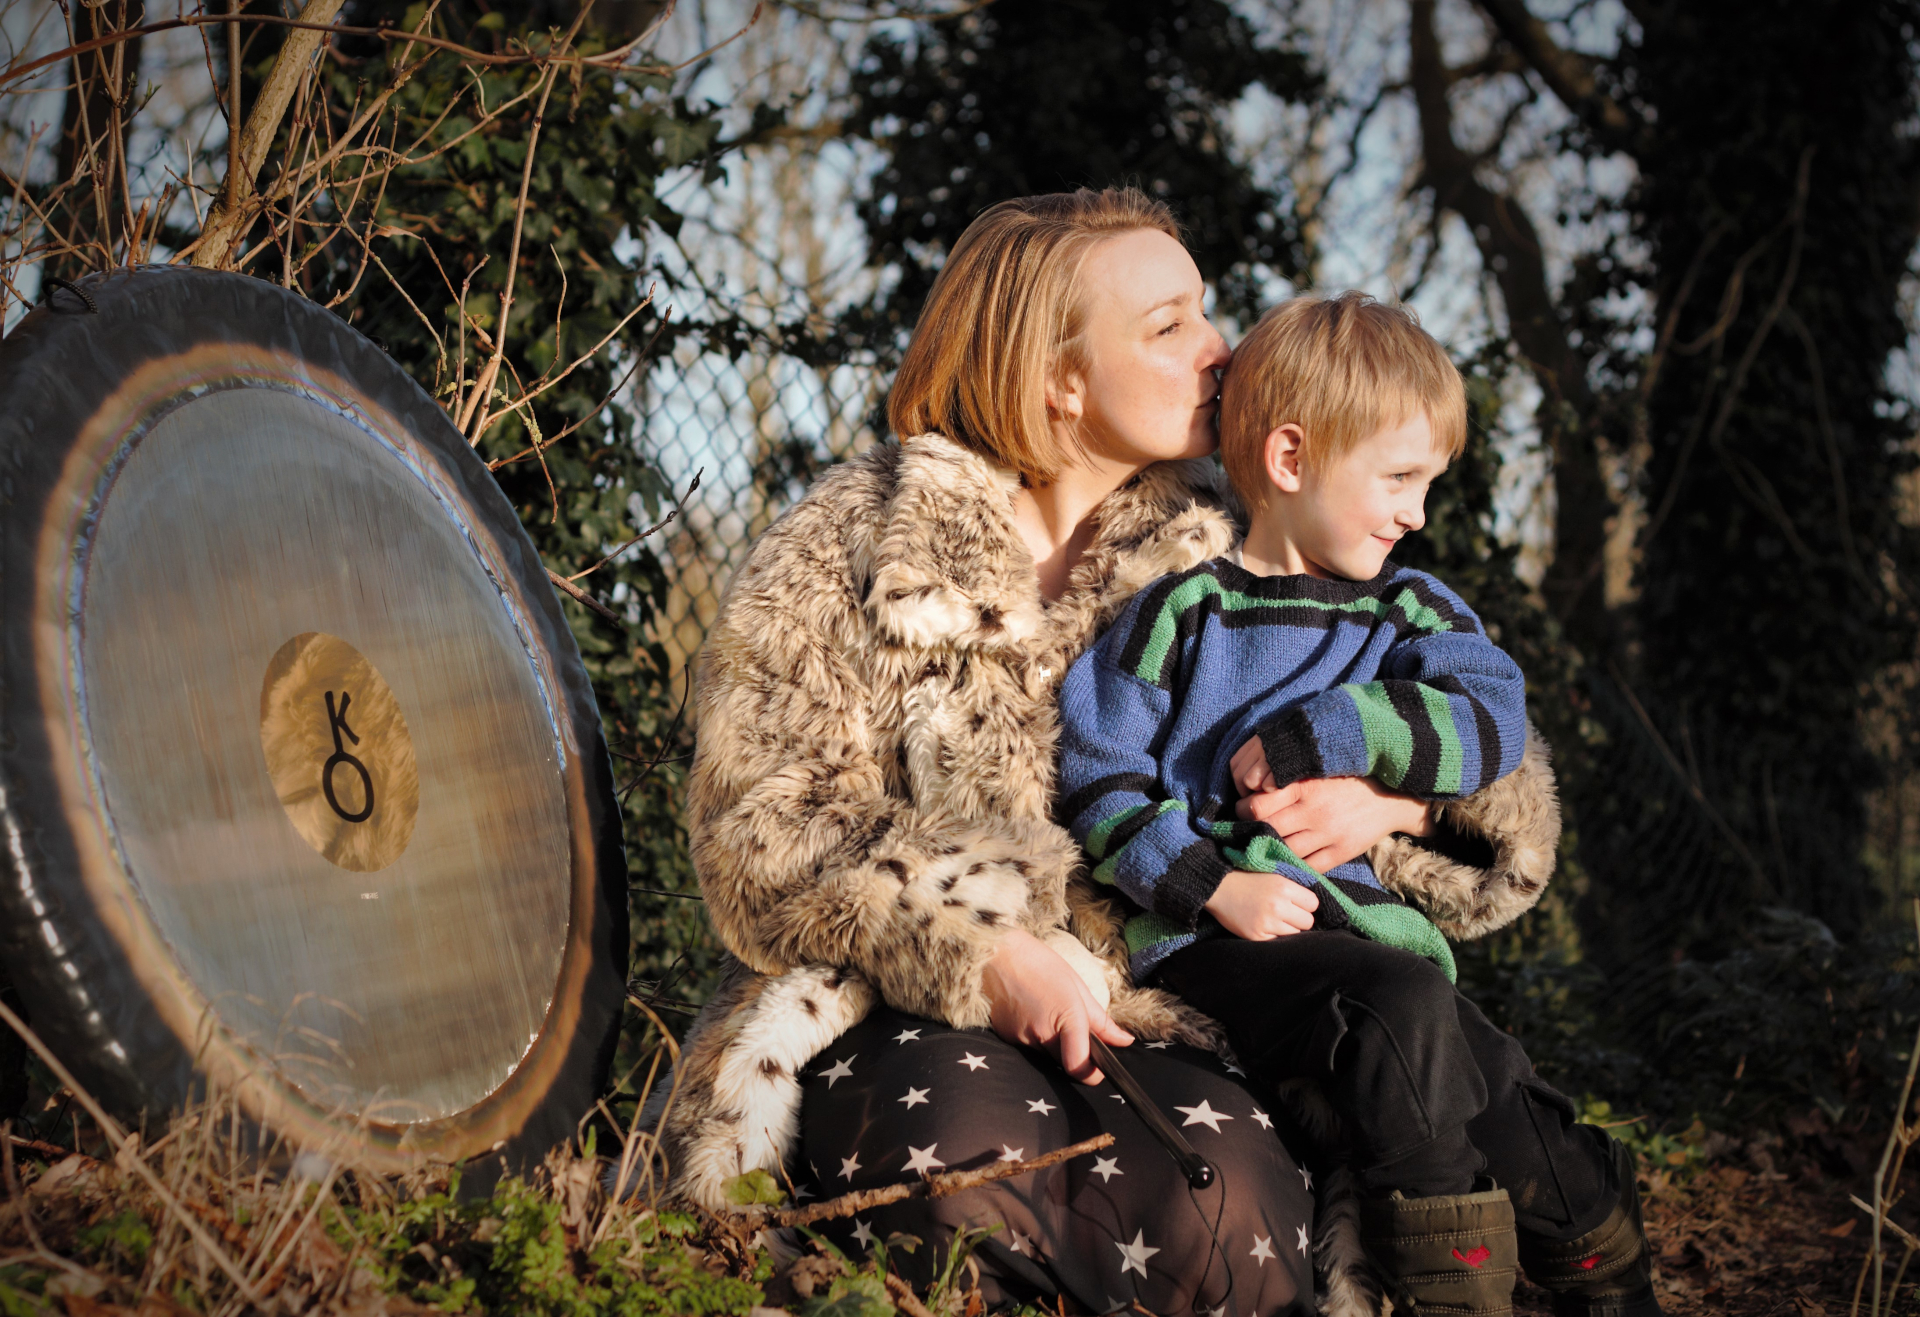 Calire White and her son with a gong outside